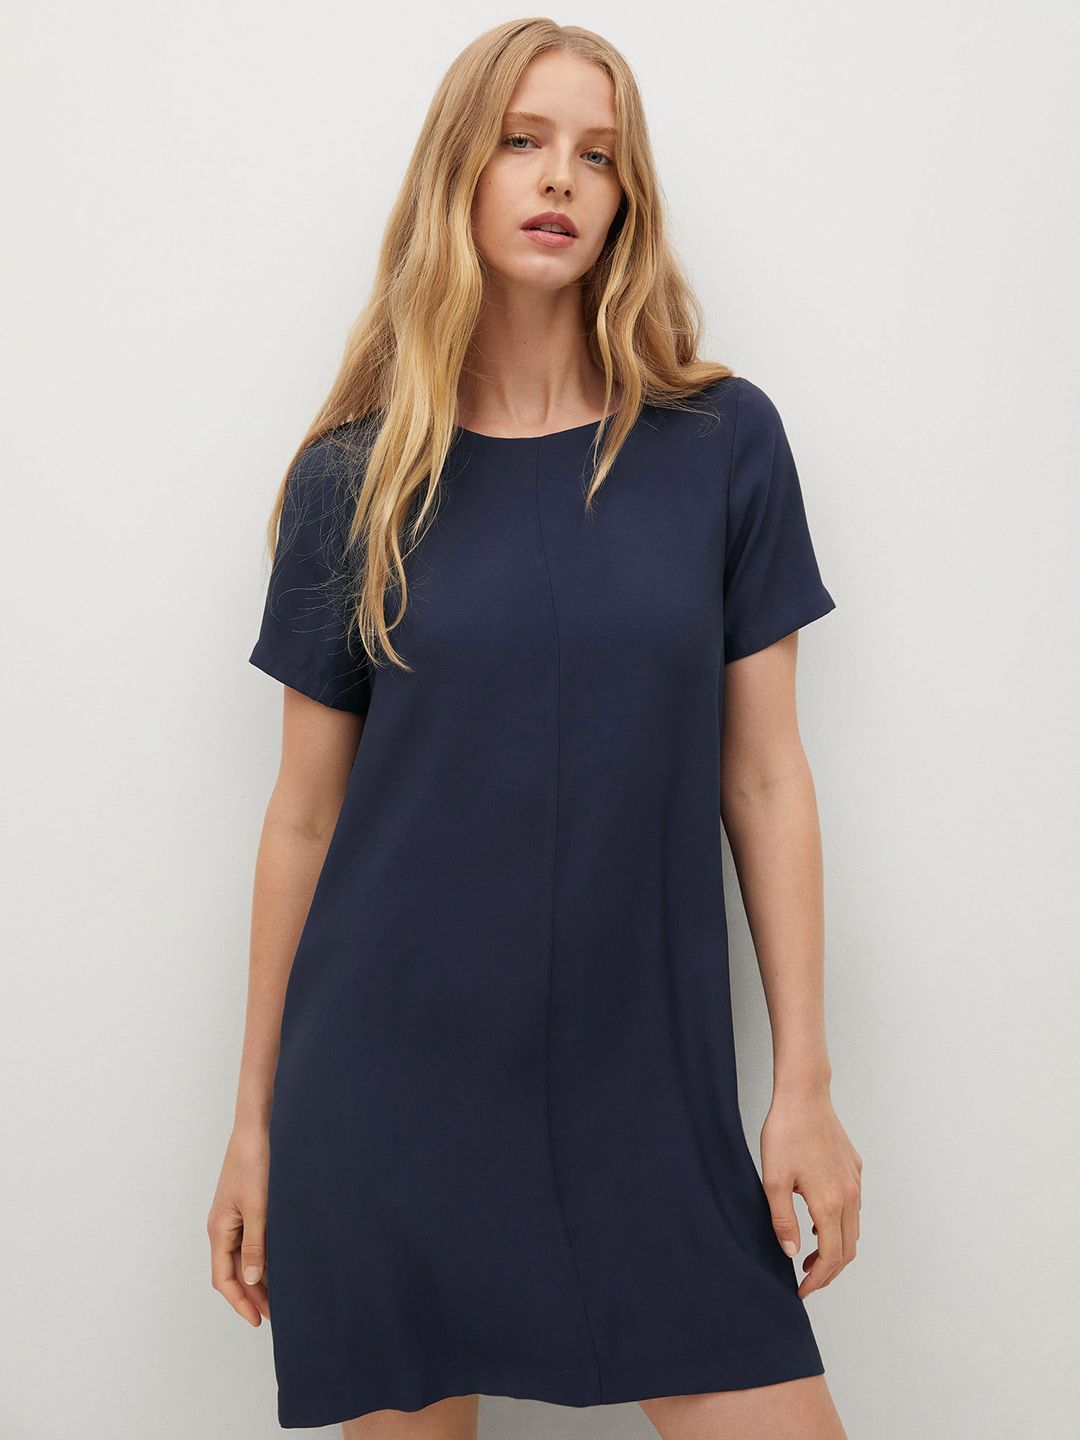 MANGO Women Navy Blue Solid T-shirt Dress Price in India